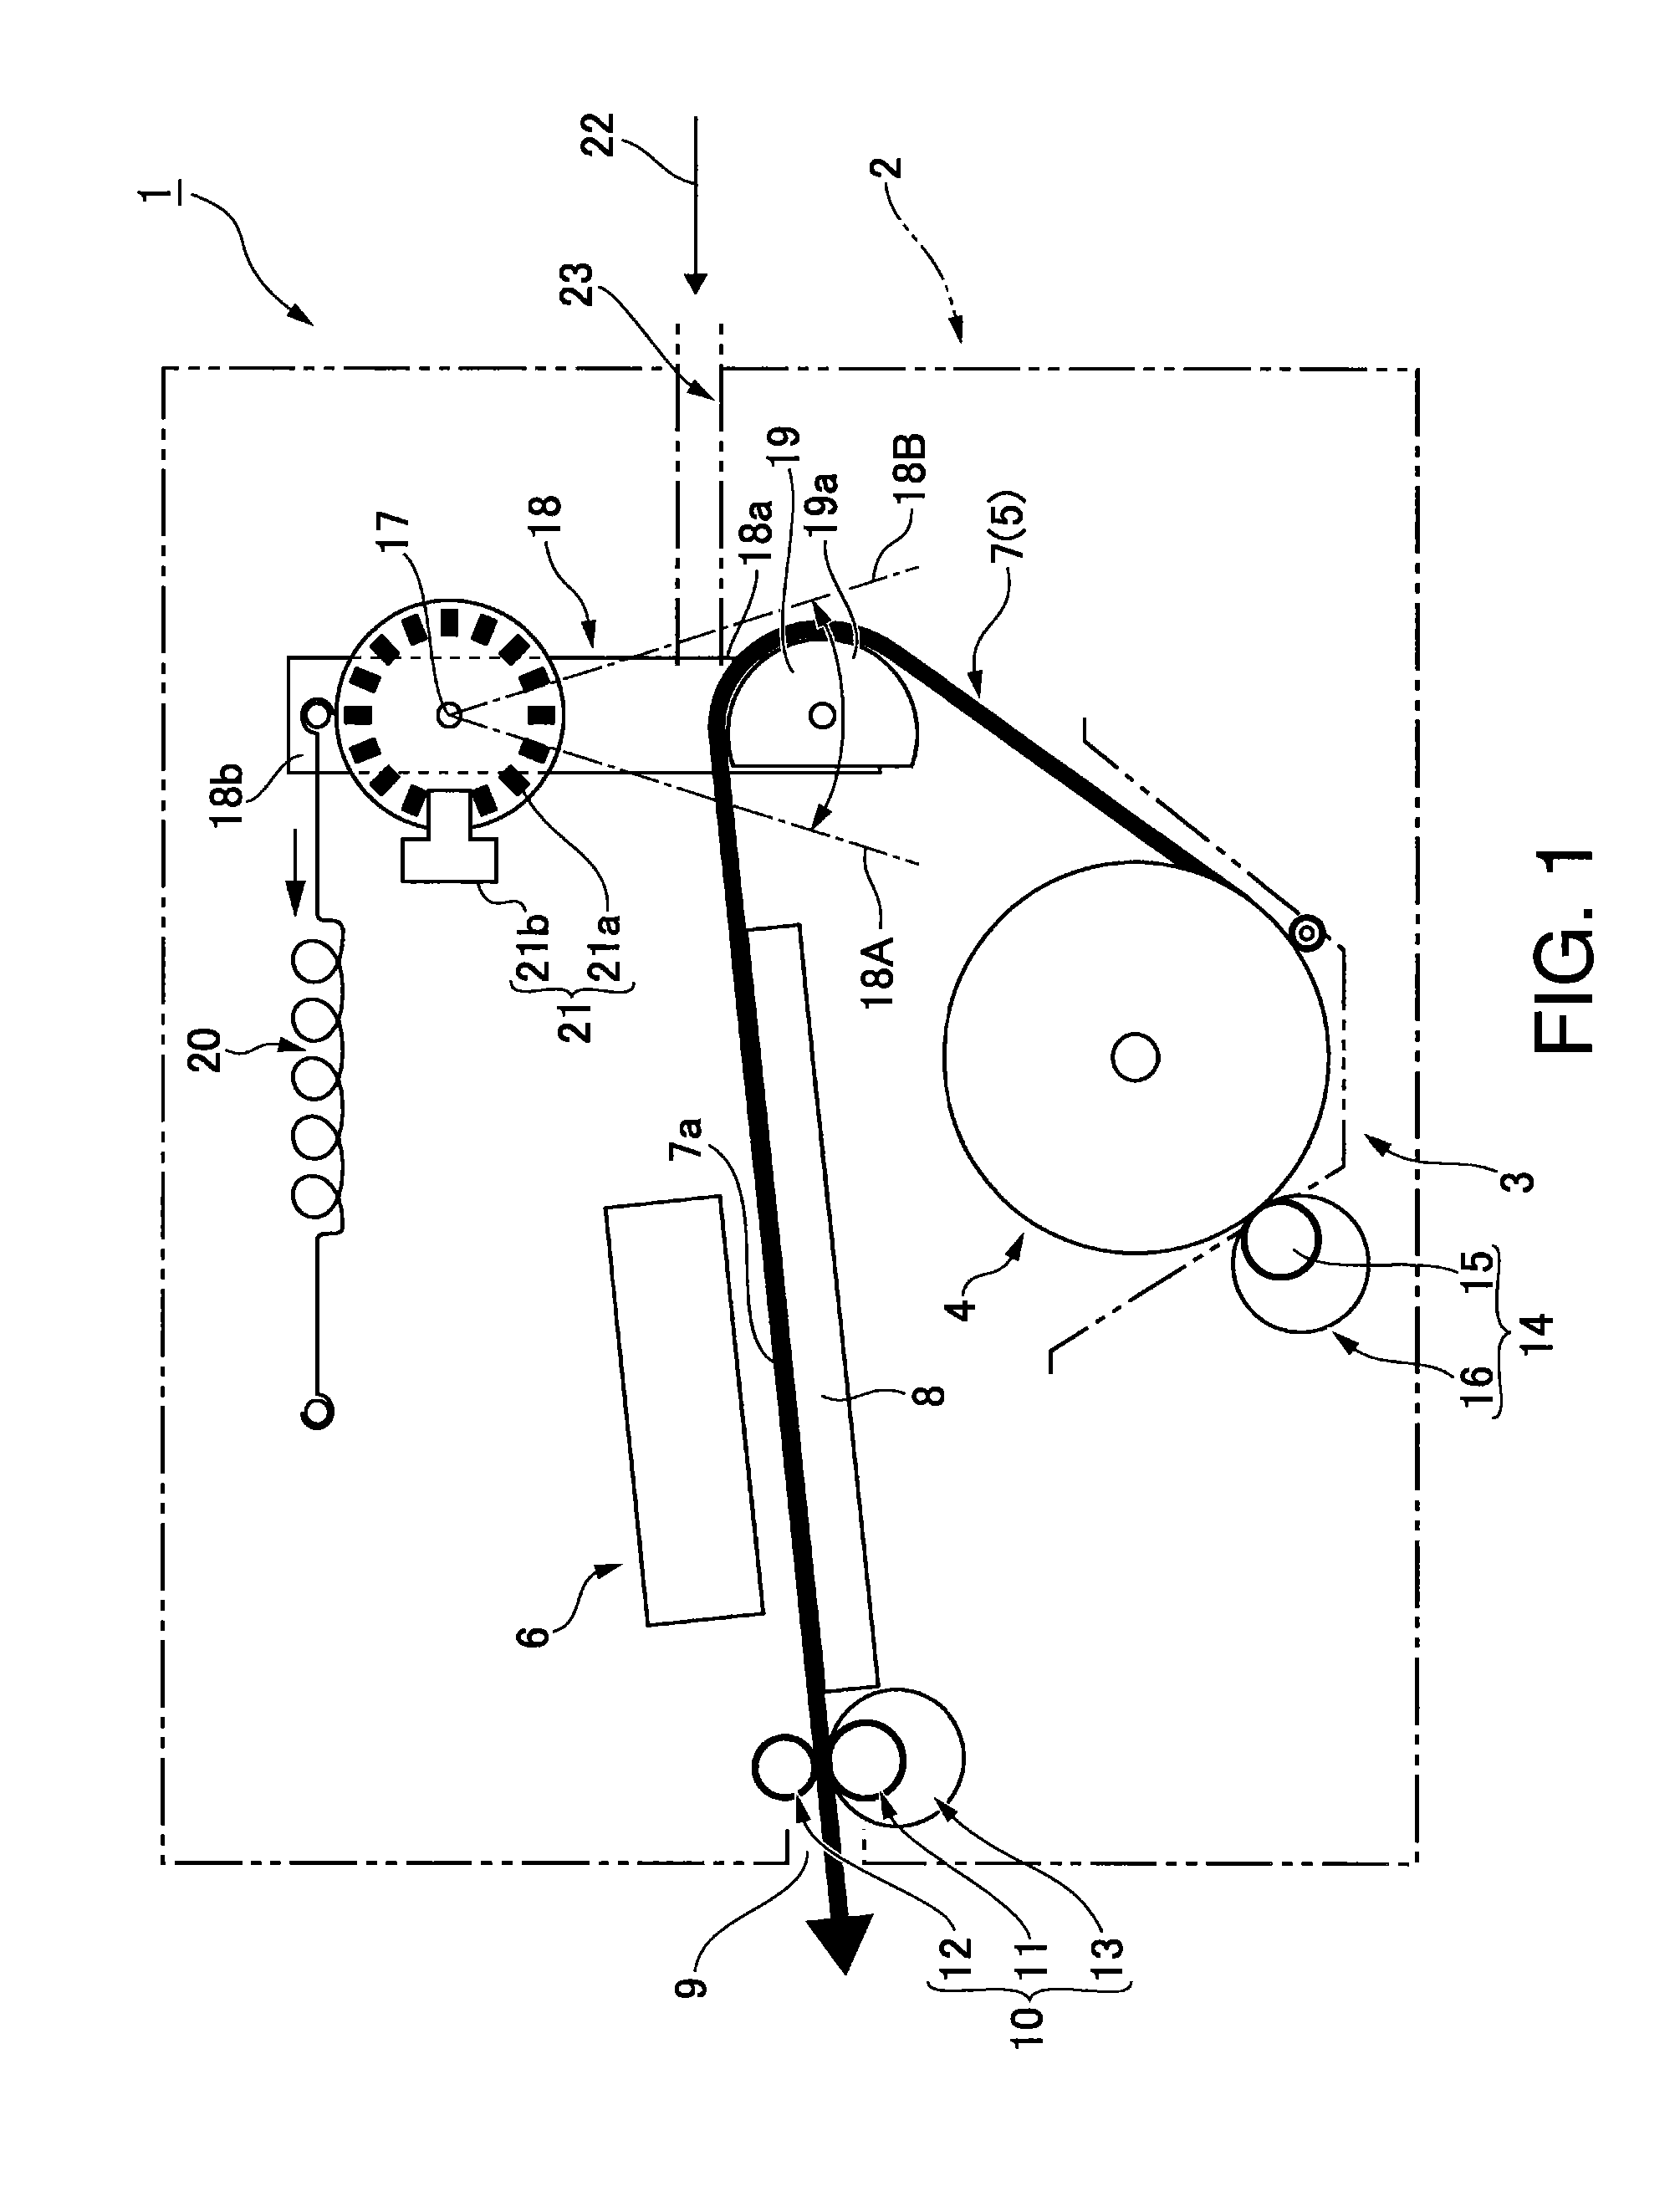 Printer with mechanism for controlling recording medium tension